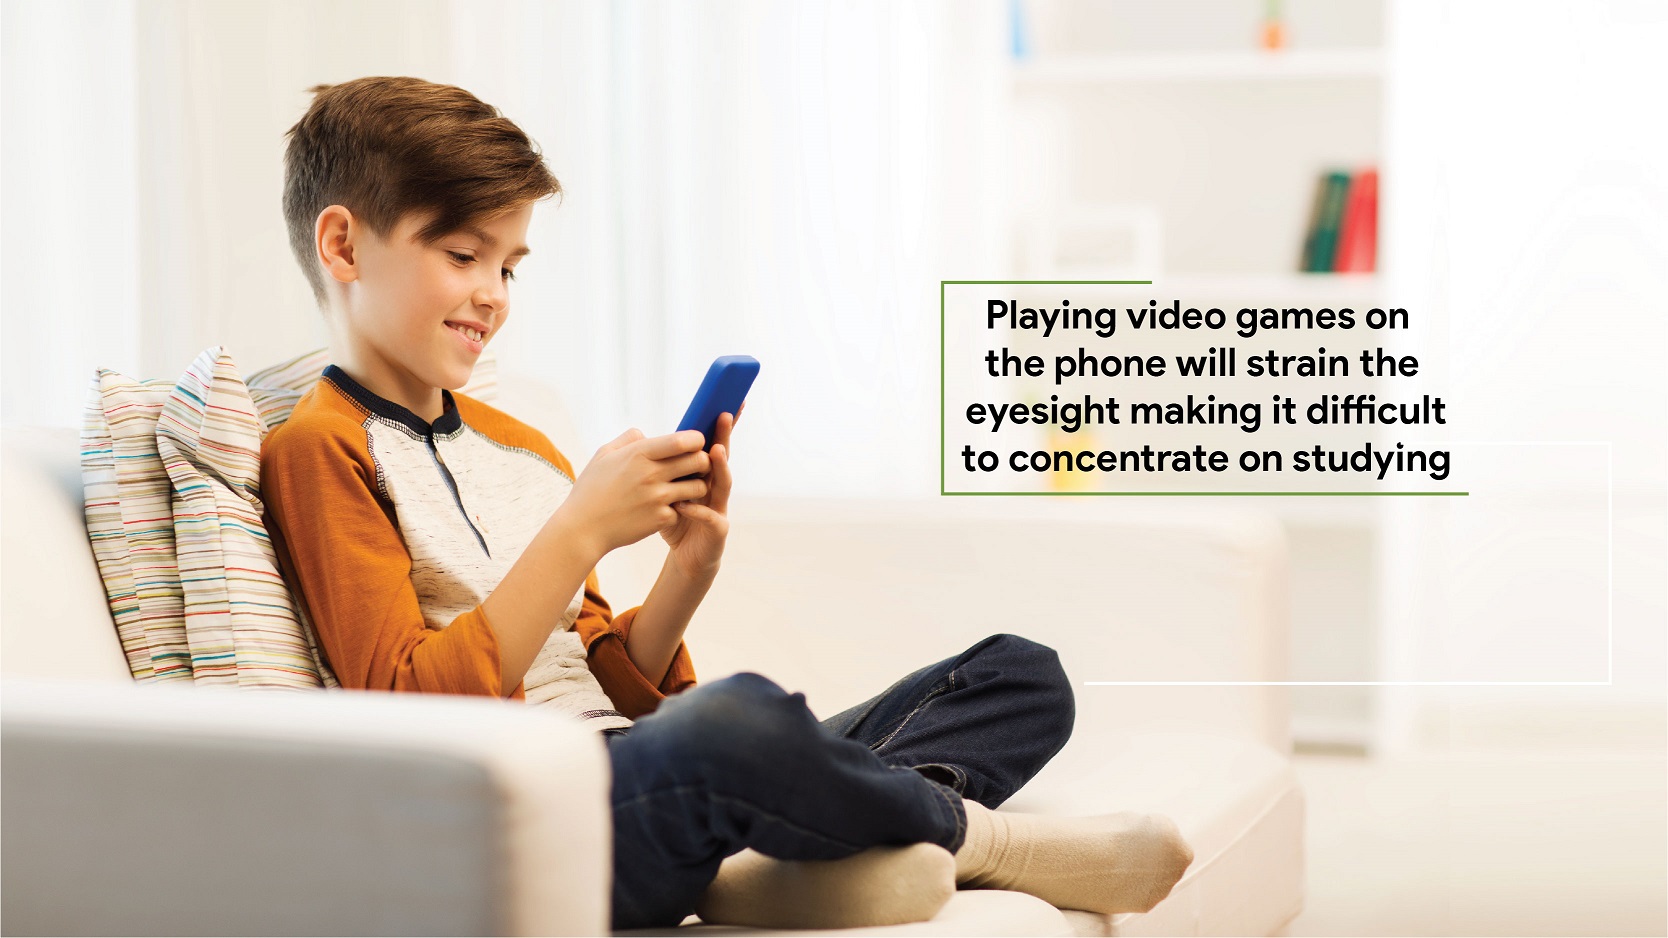 Playing video games on the phone will strain the eyesight making it difficult to concentrate on studying